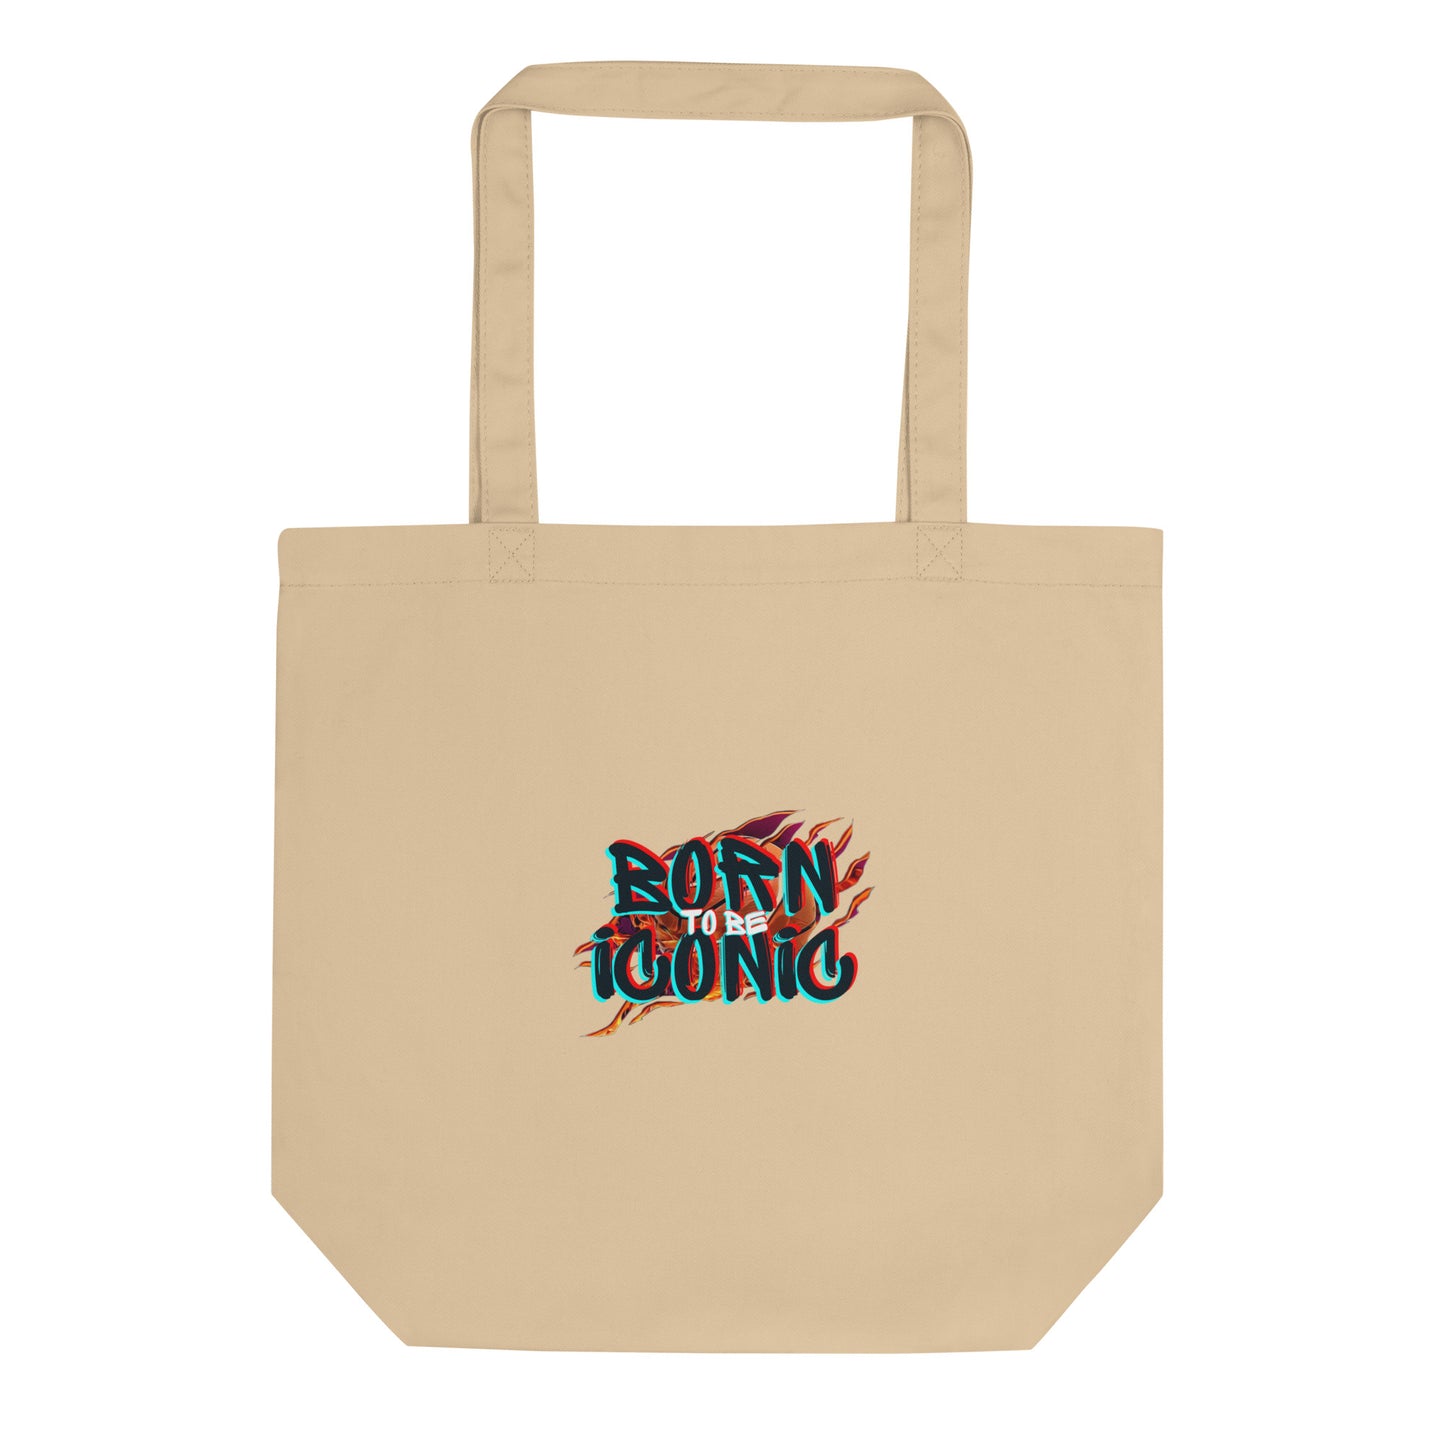 Born to Be ICONIC Eco Tote Bag